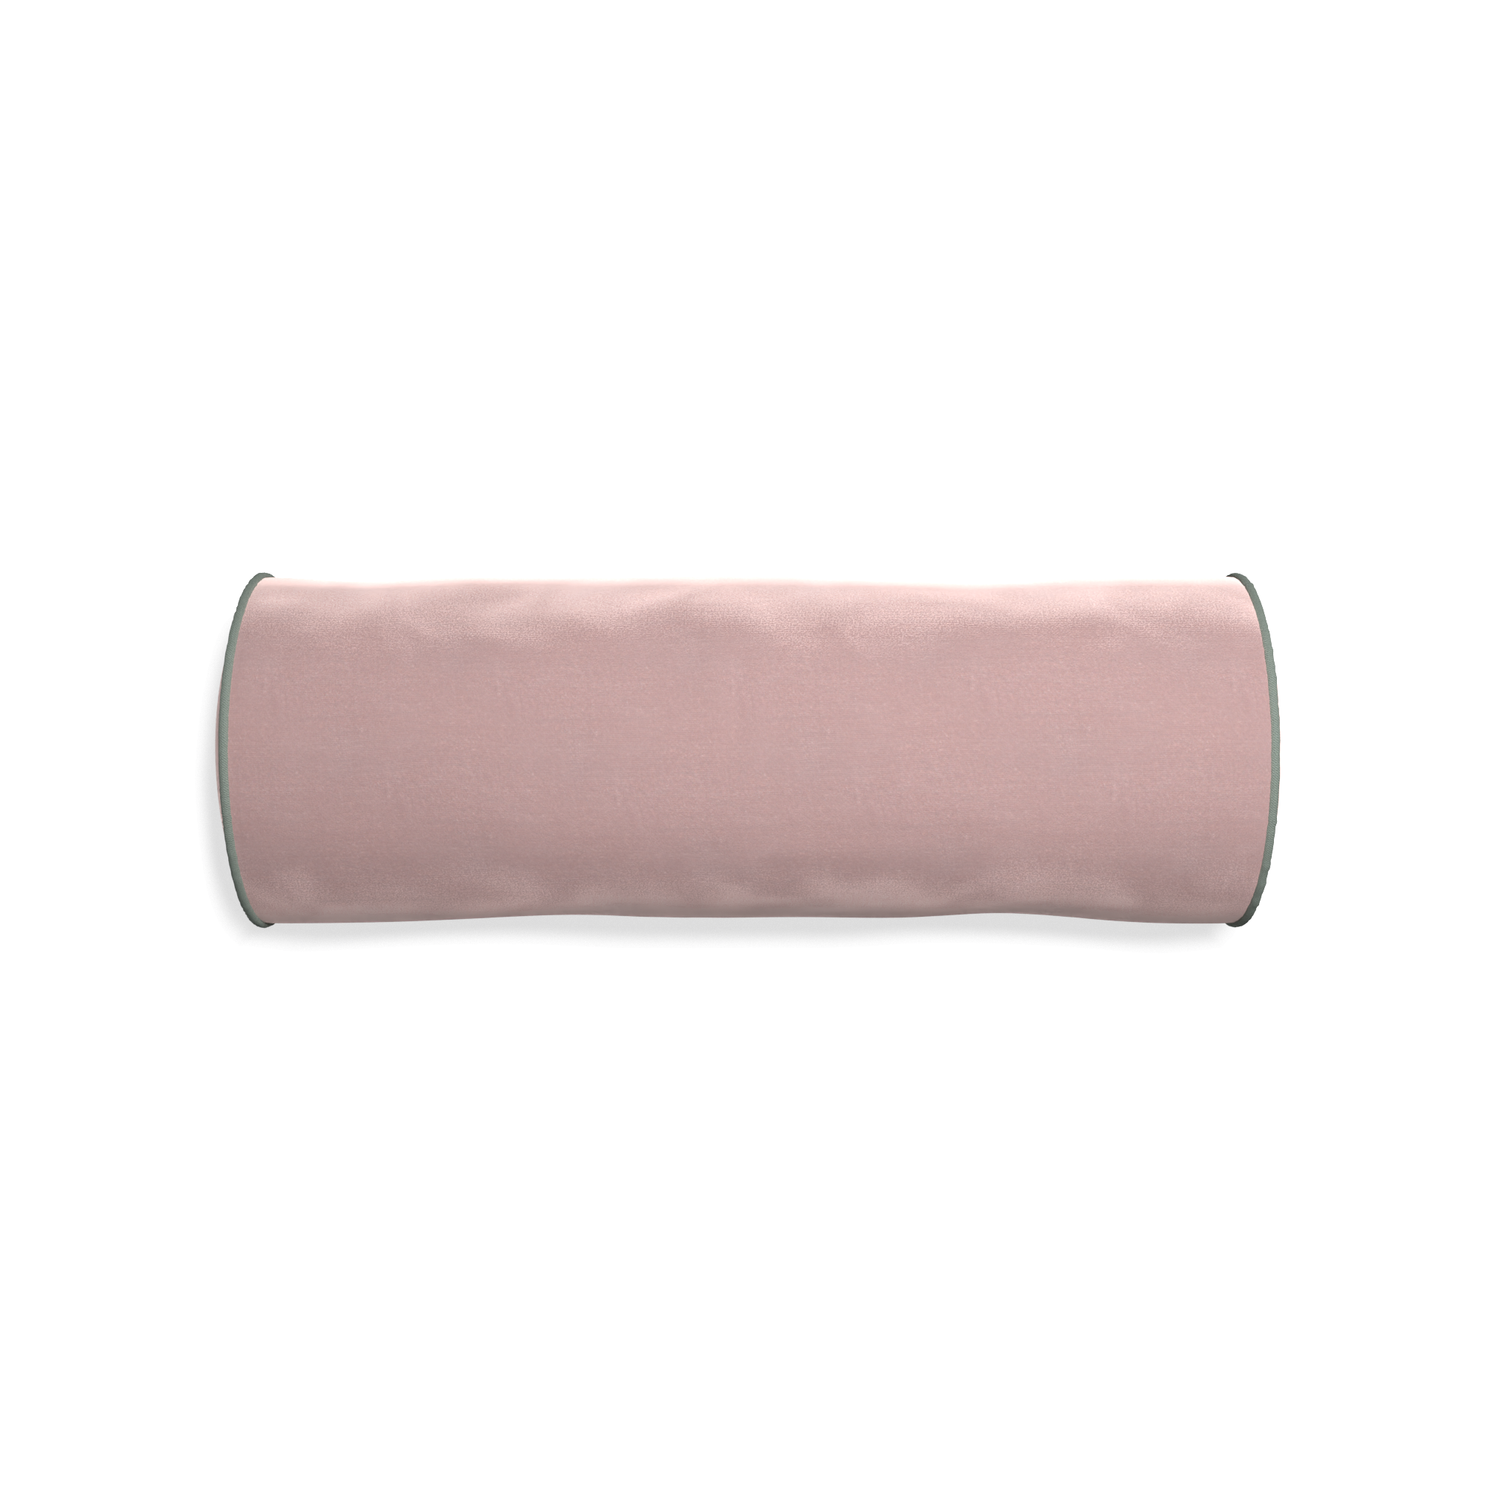 Bolster mauve velvet custom mauvepillow with sage piping on white background